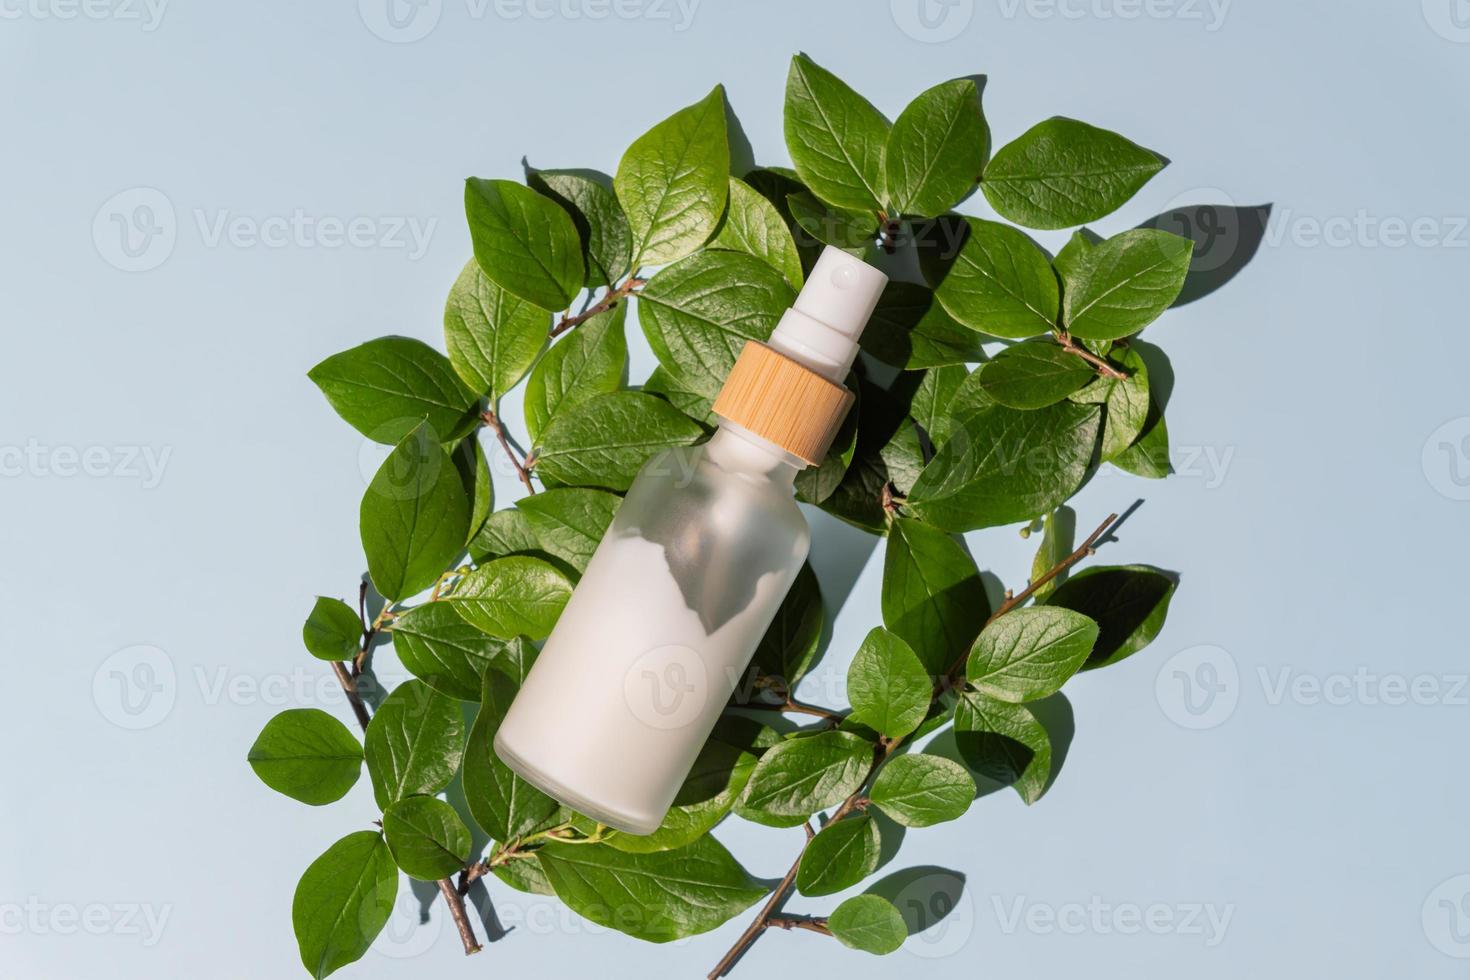 Transparent glass cosmetic bottle with a pusher on a blue background with tropical leaves. Natural cosmetics concept, natural essential oil and skin care products. photo